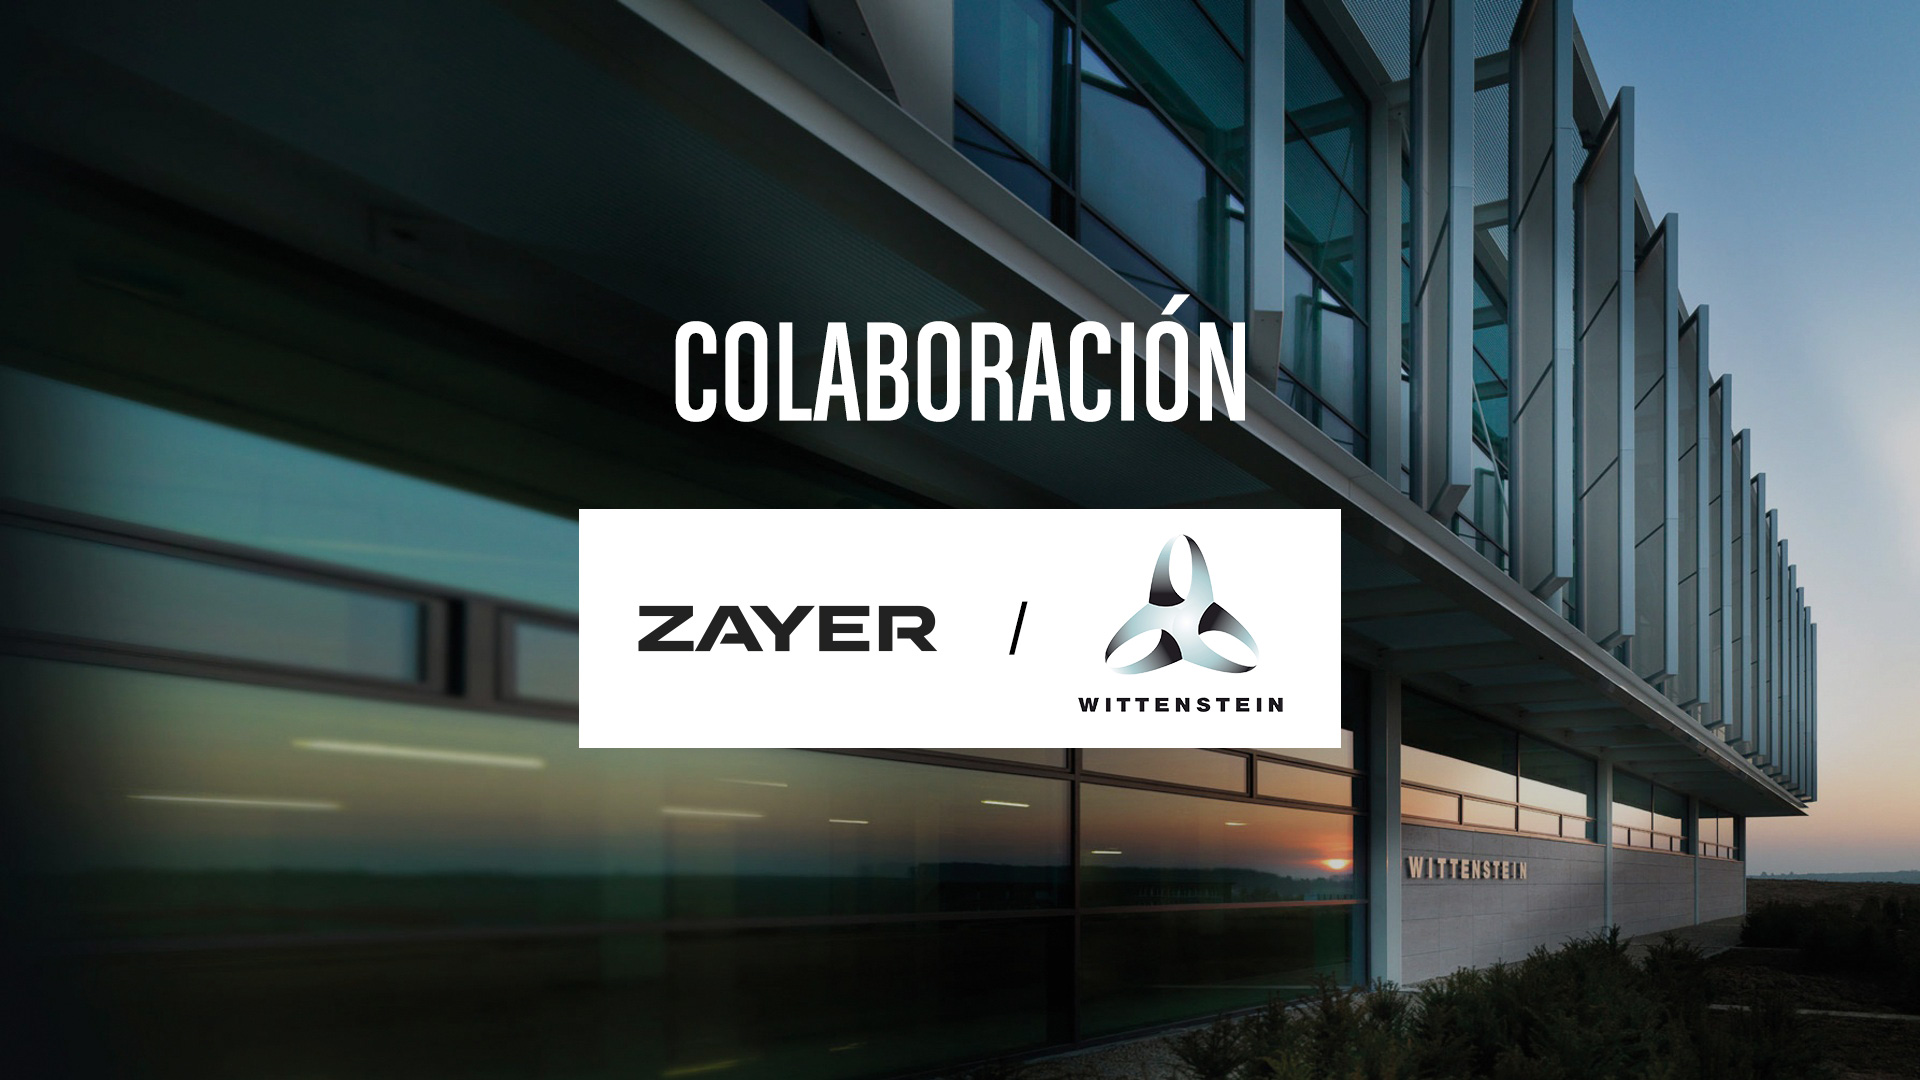 SUCCESSFUL PARTNERSHIP BETWEEN WITTENSTEIN AND ZAYER